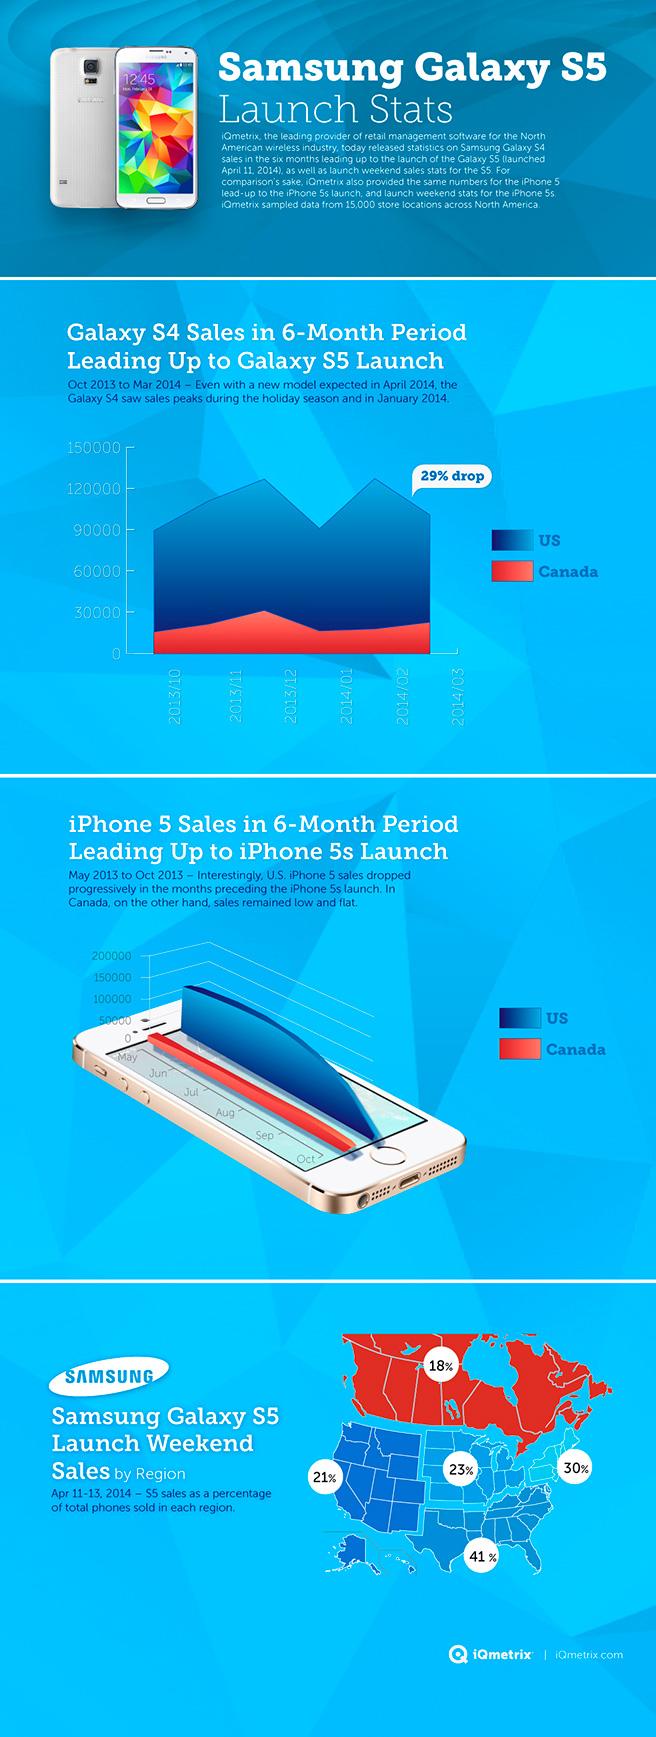 samsung_galaxys5_infographic1